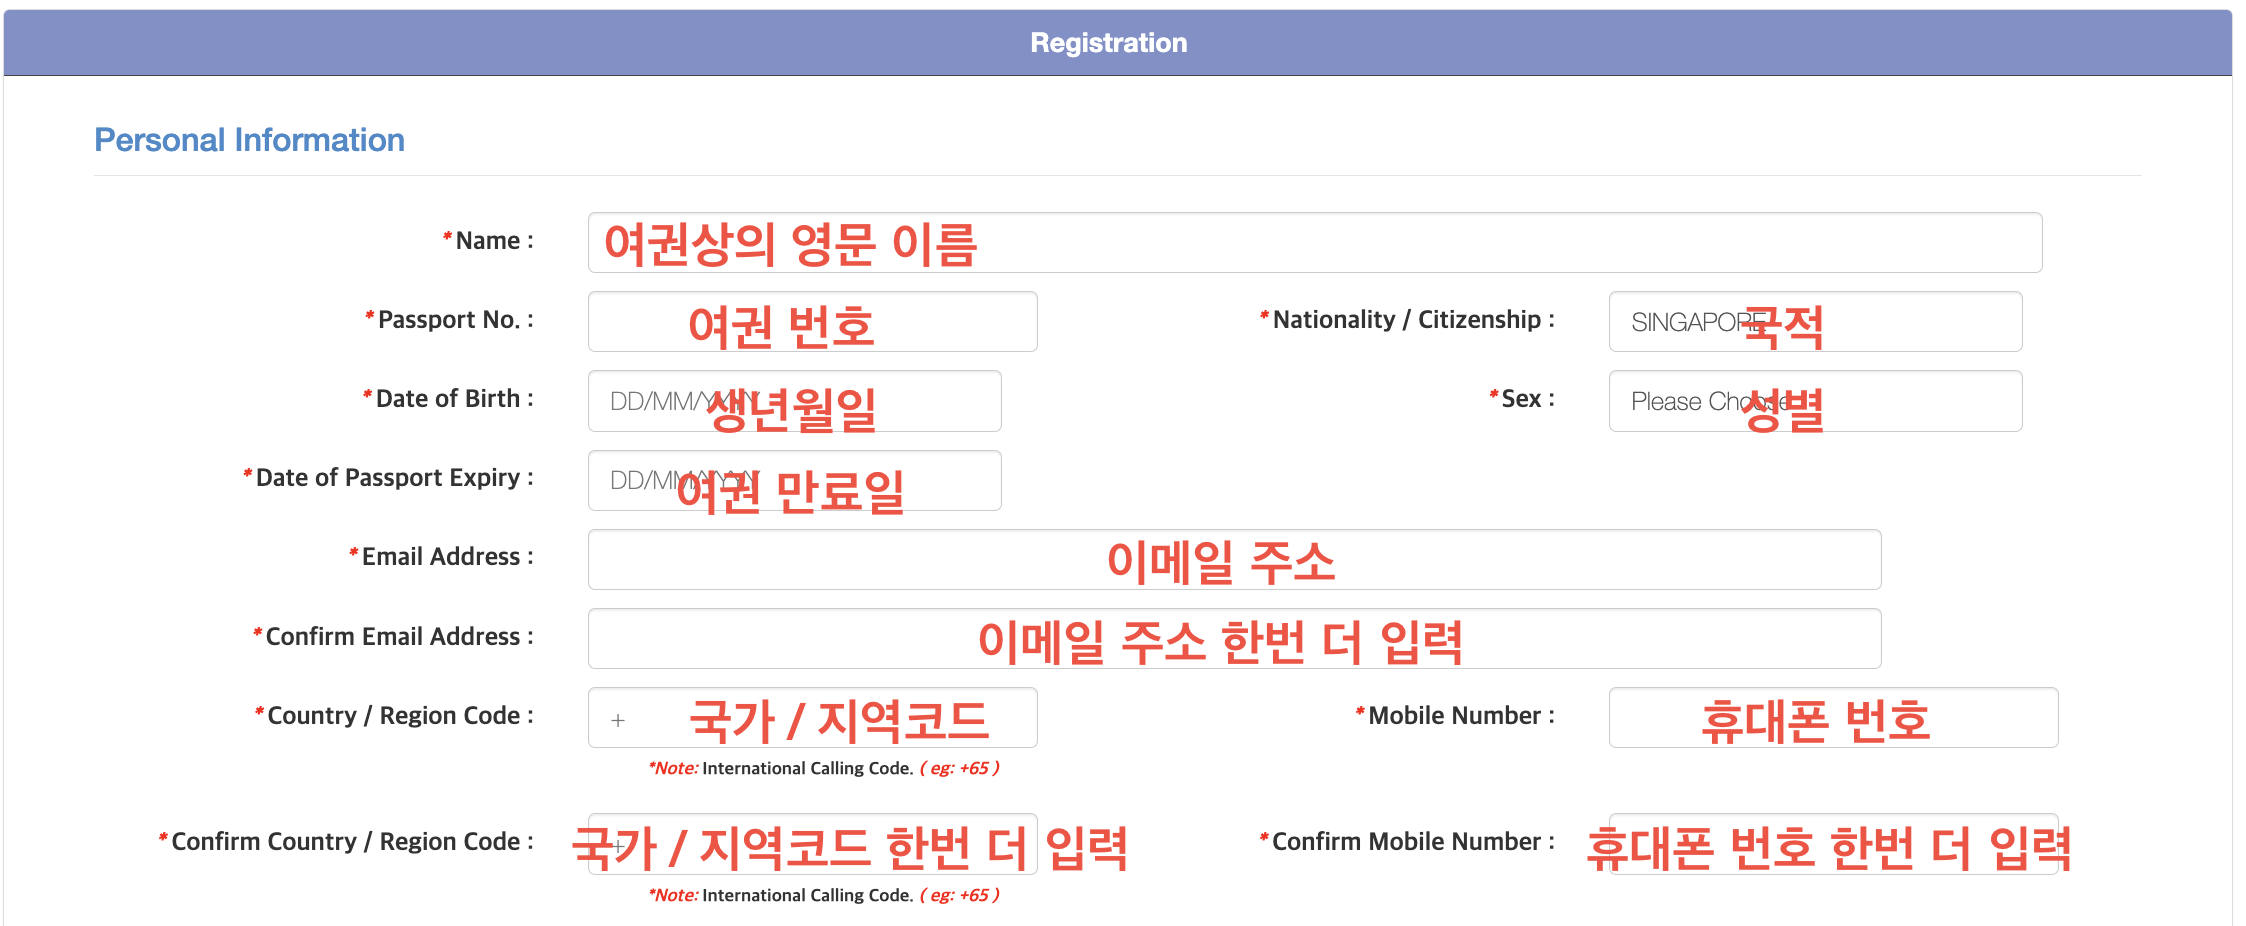 Personal-Information 개인정보 입력